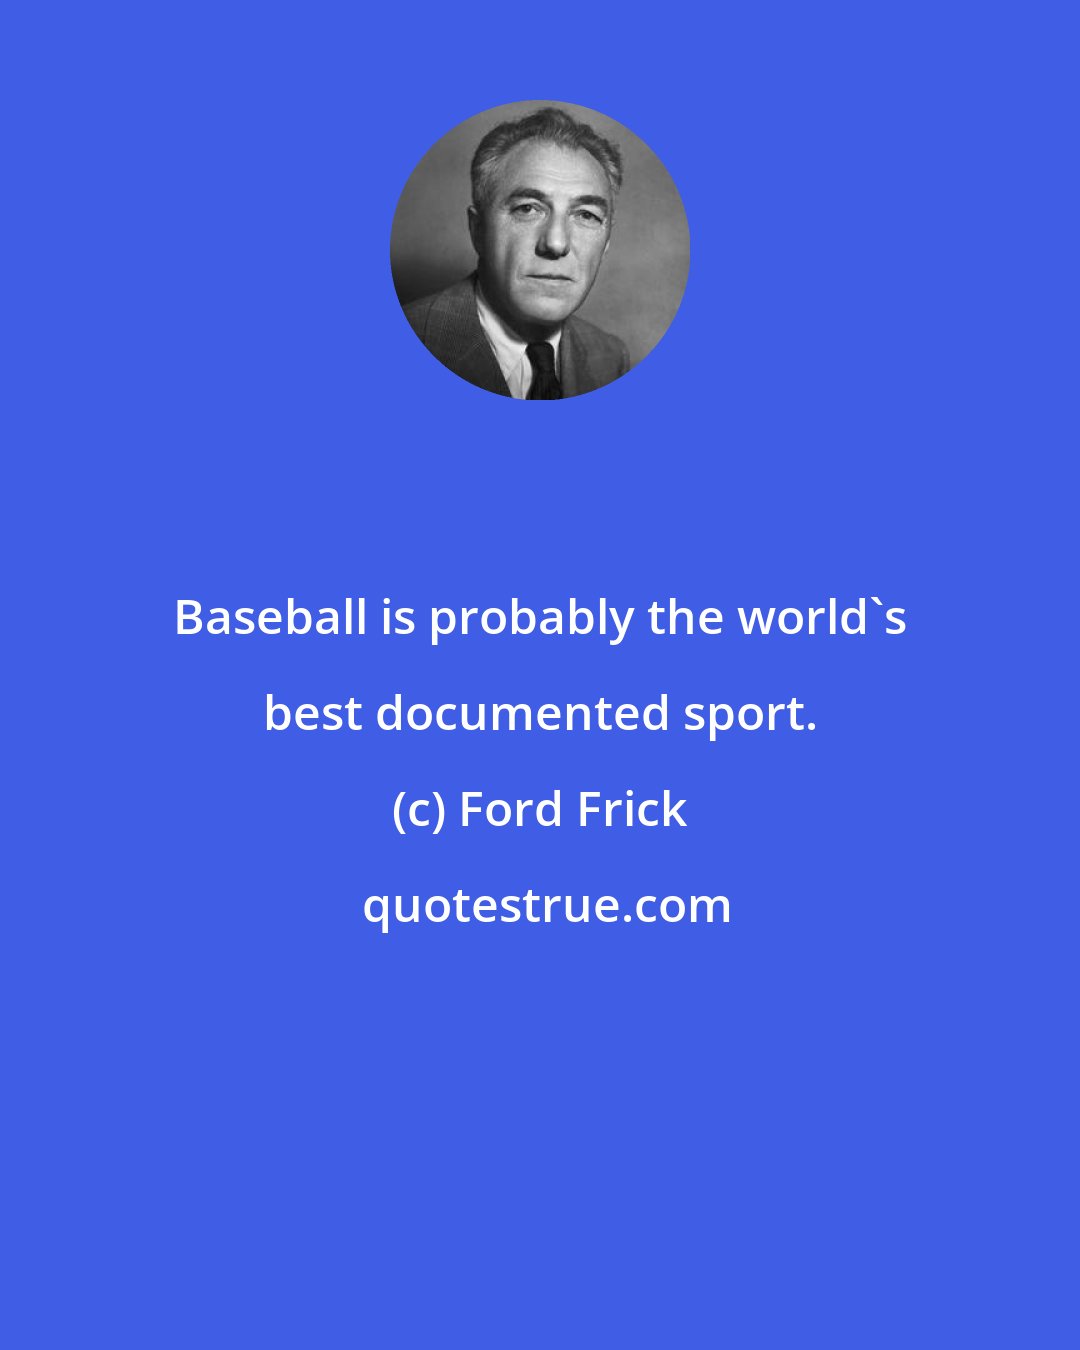 Ford Frick: Baseball is probably the world's best documented sport.